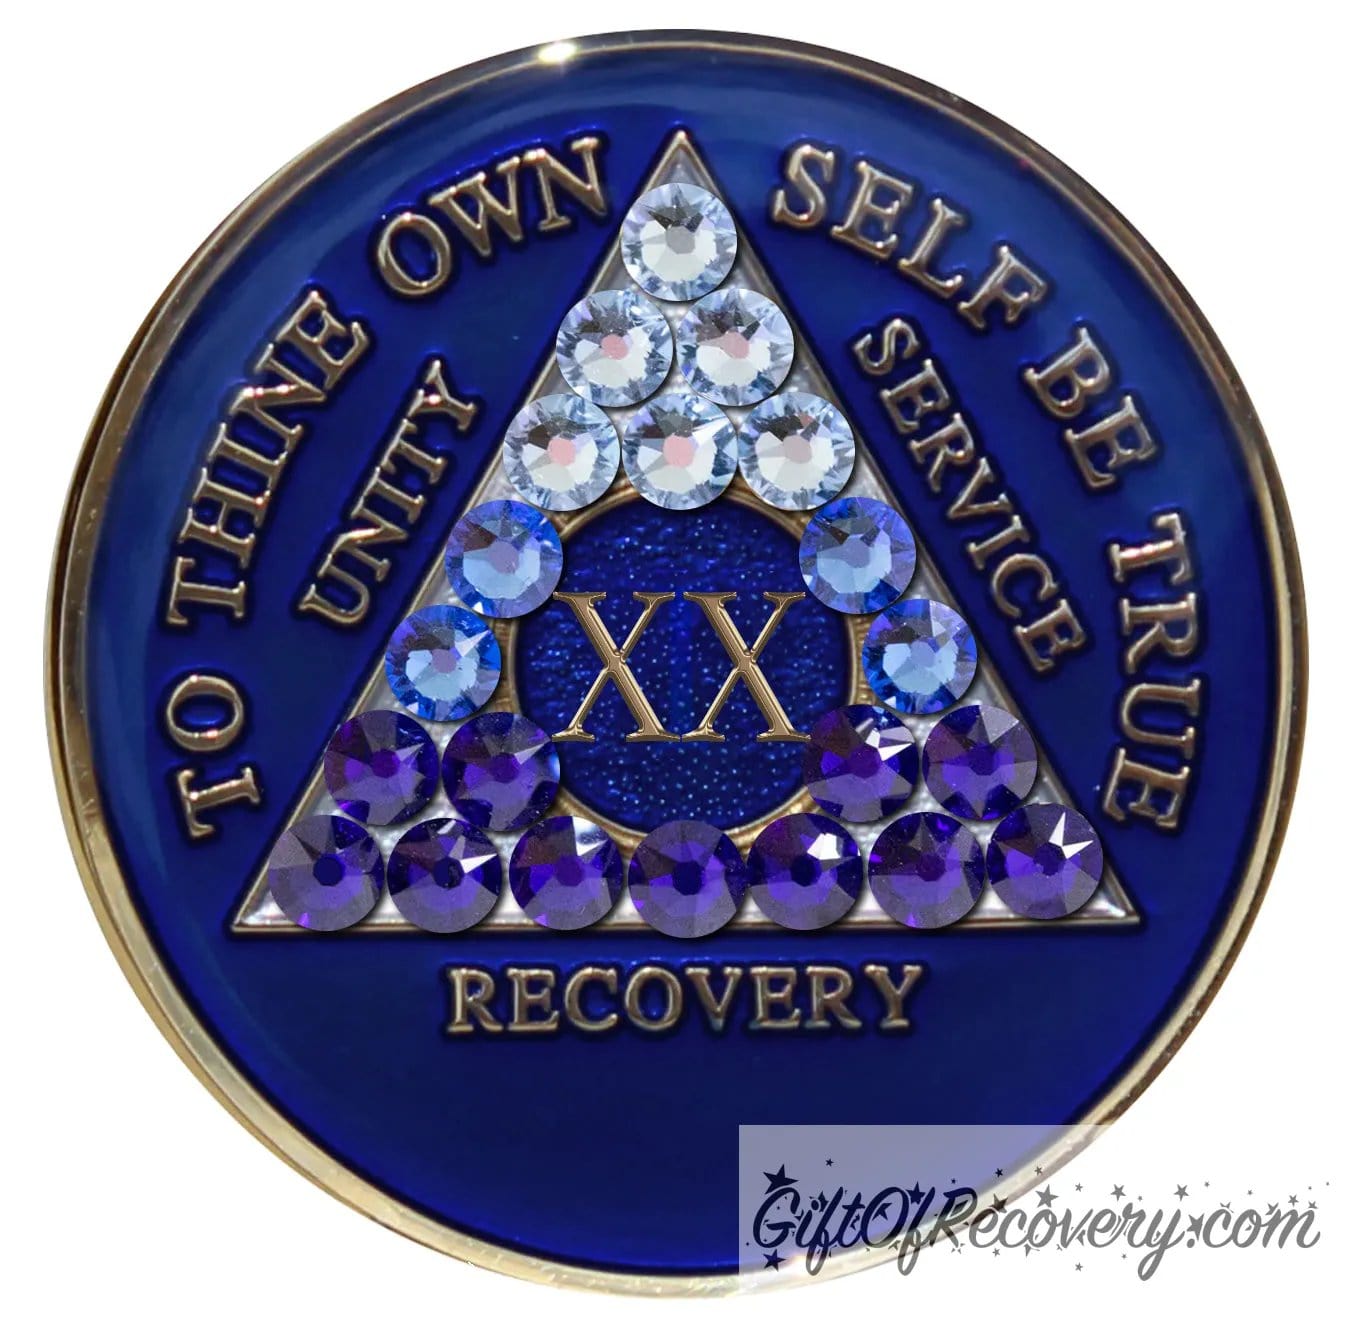 20 year Big Book Blue AA medallion with 21 genuine crystals forming the triangle, going from light to dark blue to represent transitions in your recovery journey, the center circle is blue sparkle, with the roman numeral, AA moto and rim in 14k gold plated brass and resin sealed for a glossy finish.